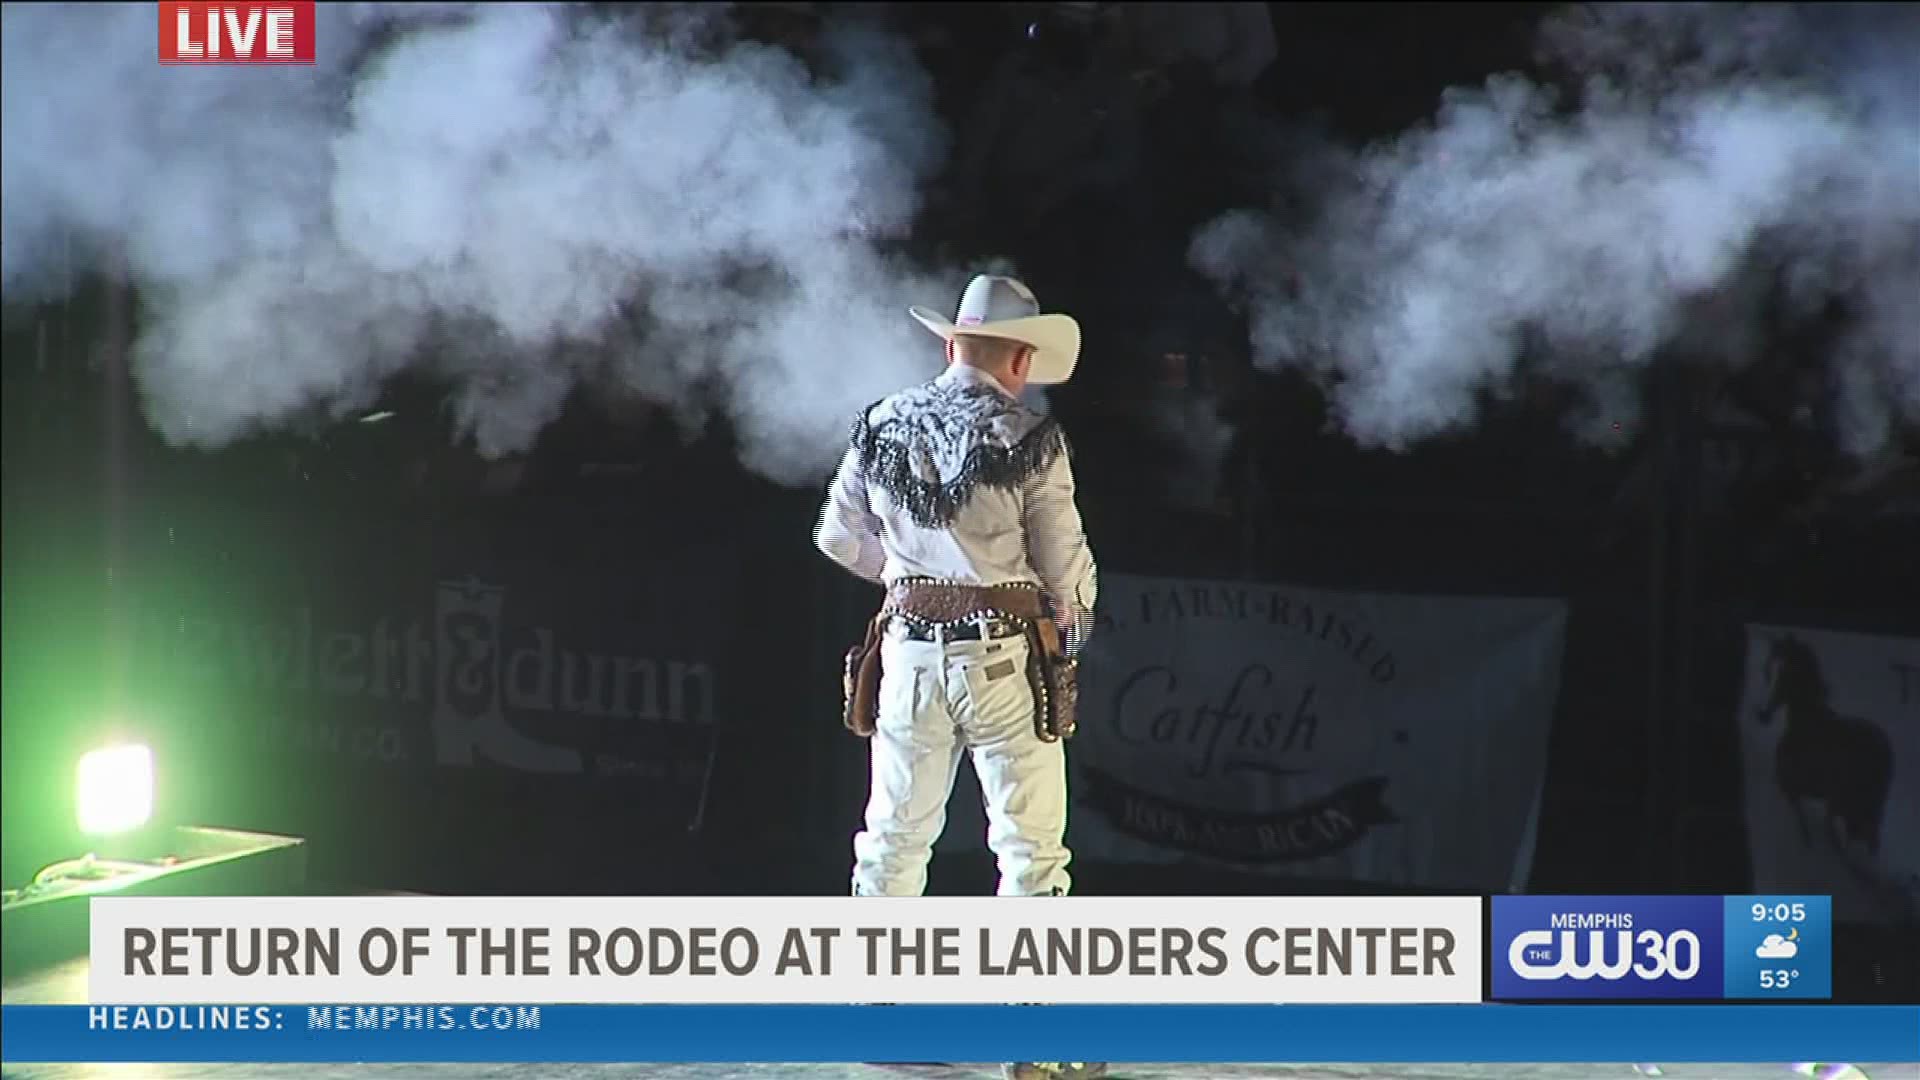 Rodeo of the MidSouth held at Landers Center since pandemic